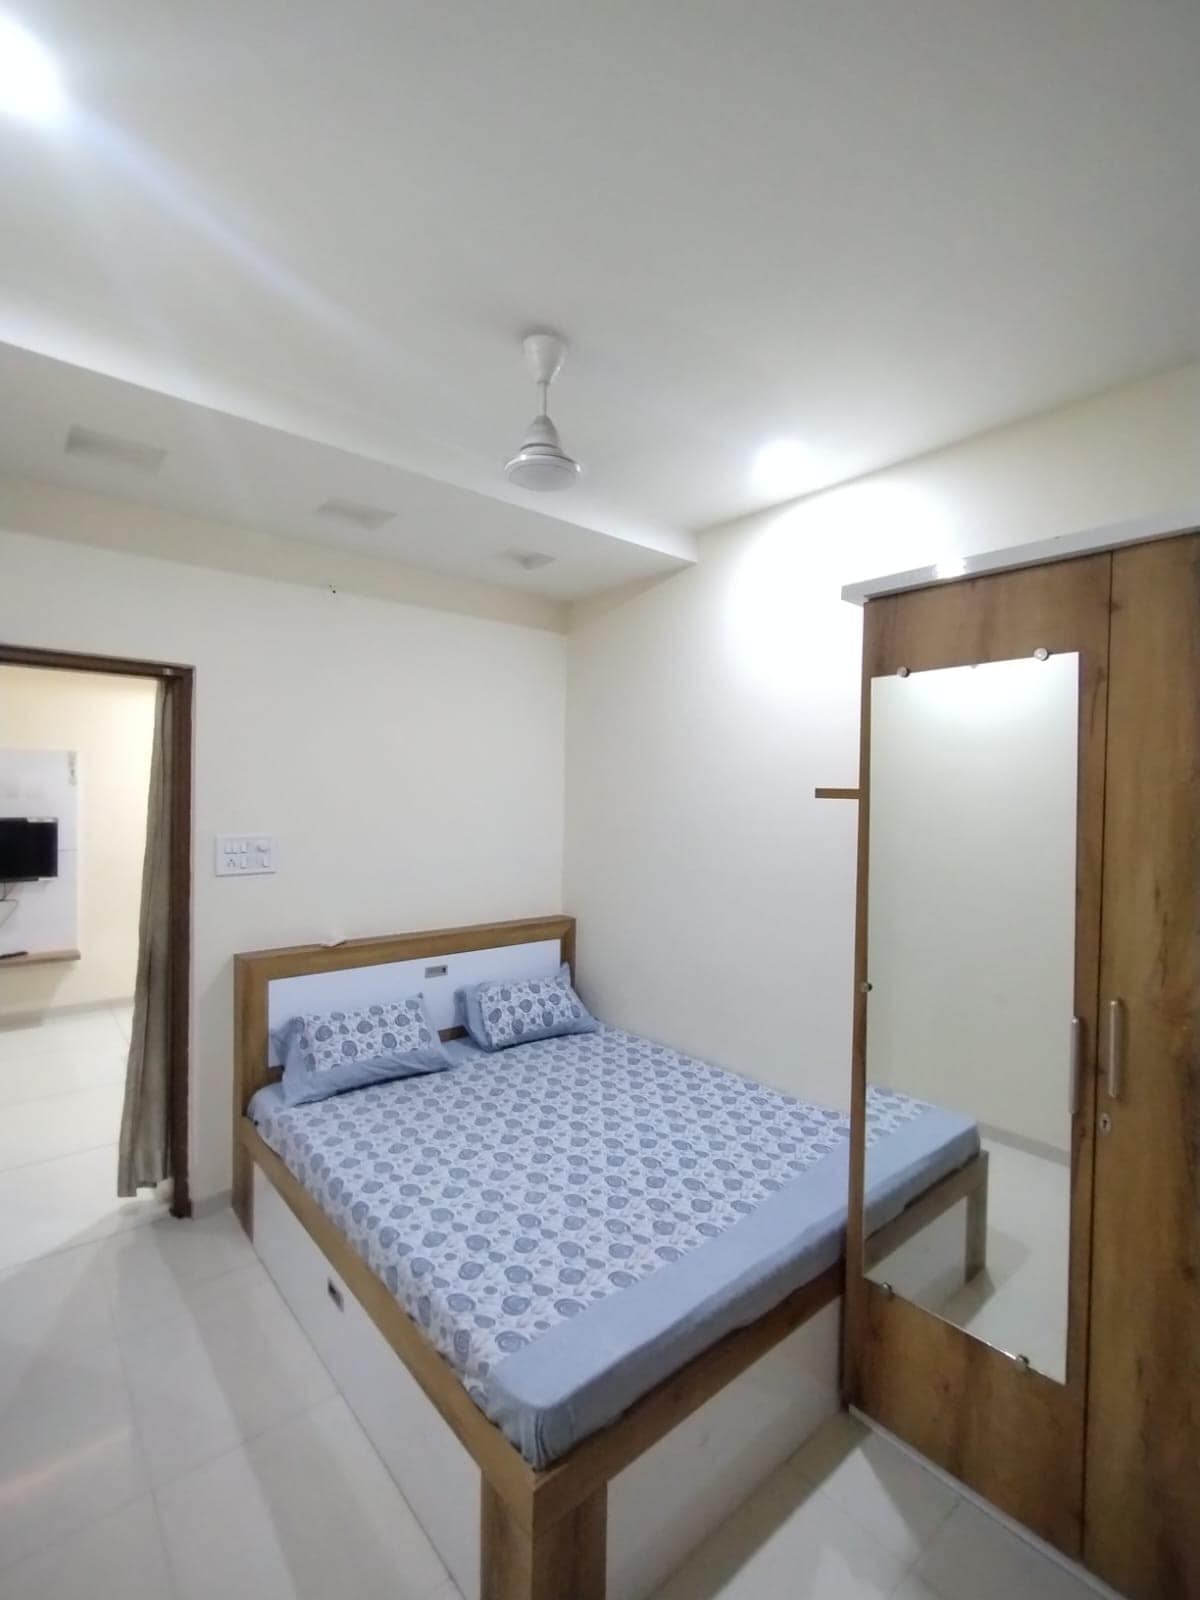 Independent Front 1BHK Flat